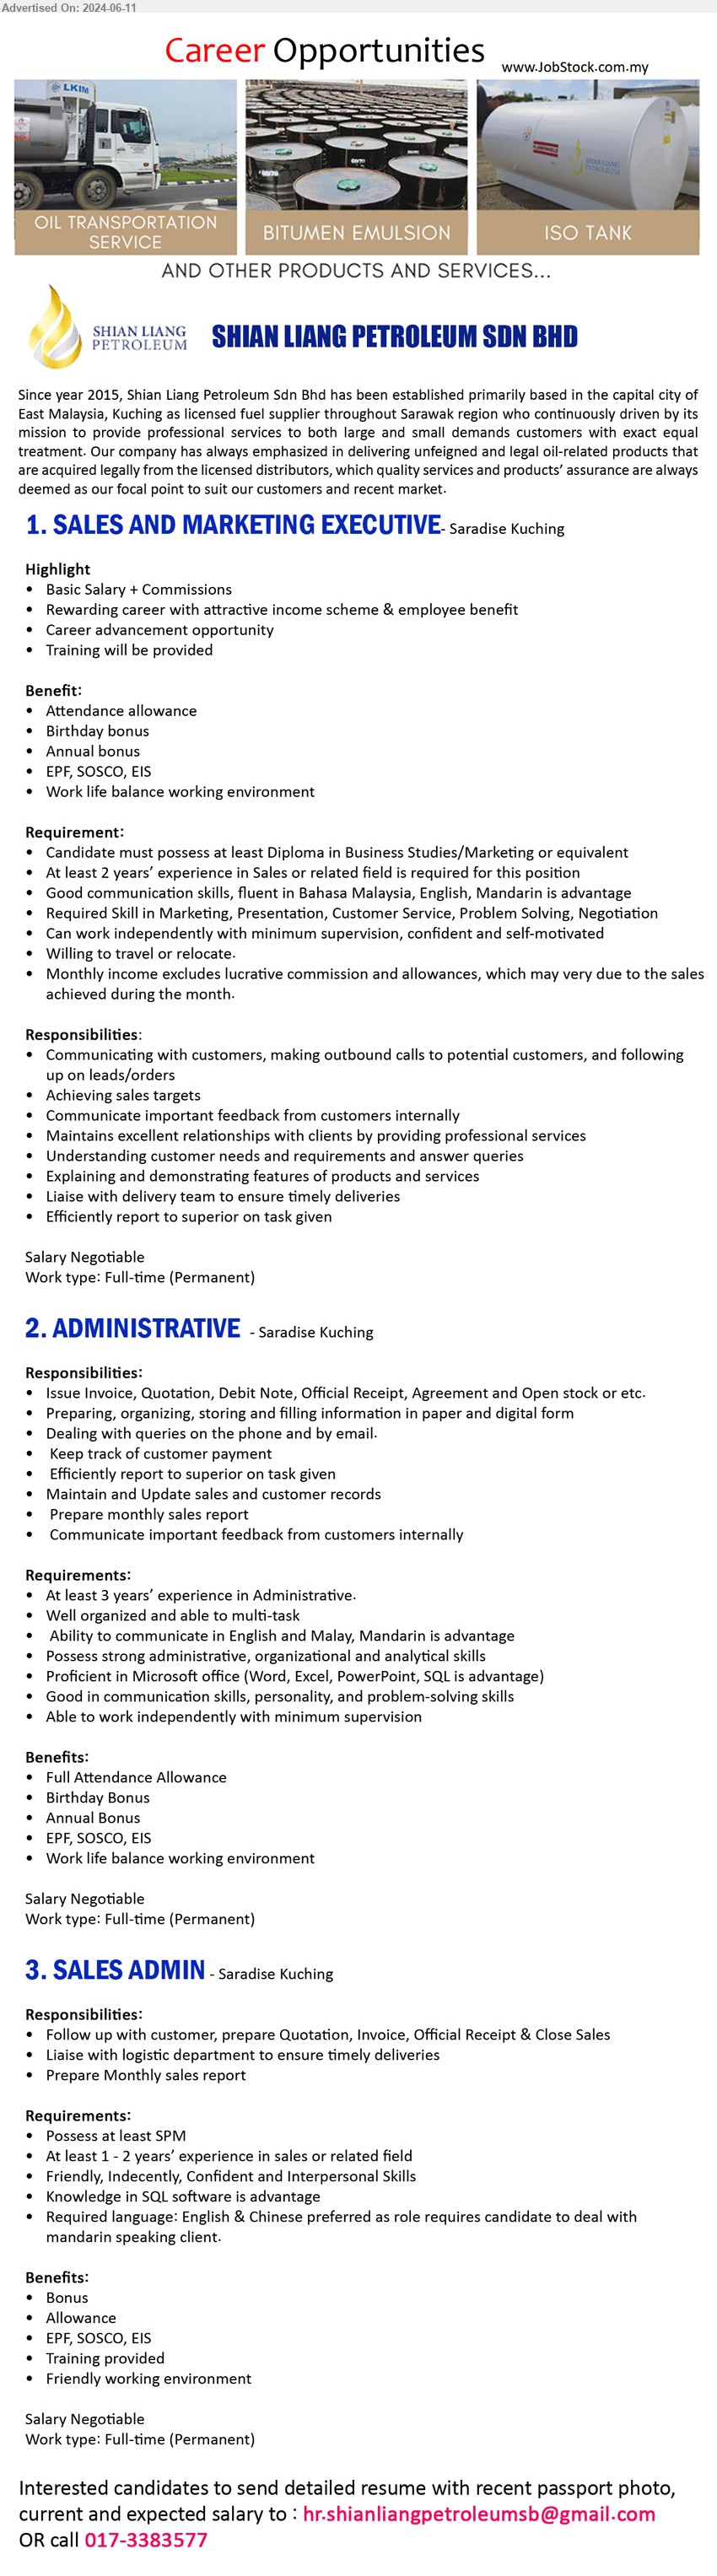 SHIAN LIANG PETROLEUM SDN BHD - 1. SALES AND MARKETING EXECUTIVE (Kuching), Diploma in Business Studies/Marketing, 2 yrs. exp.,...
2. ADMINISTRATIVE (Kuching), At least 3 years’ experience in Administrative., Proficient in Microsoft office (Word, Excel, PowerPoint, SQL is advantage),...
3. SALES ADMIN (Kuching), SPM, 1-2 yrs. exp., Knowledge in SQL software is advantage,...
Call 017-3383577 / Email resume to ...